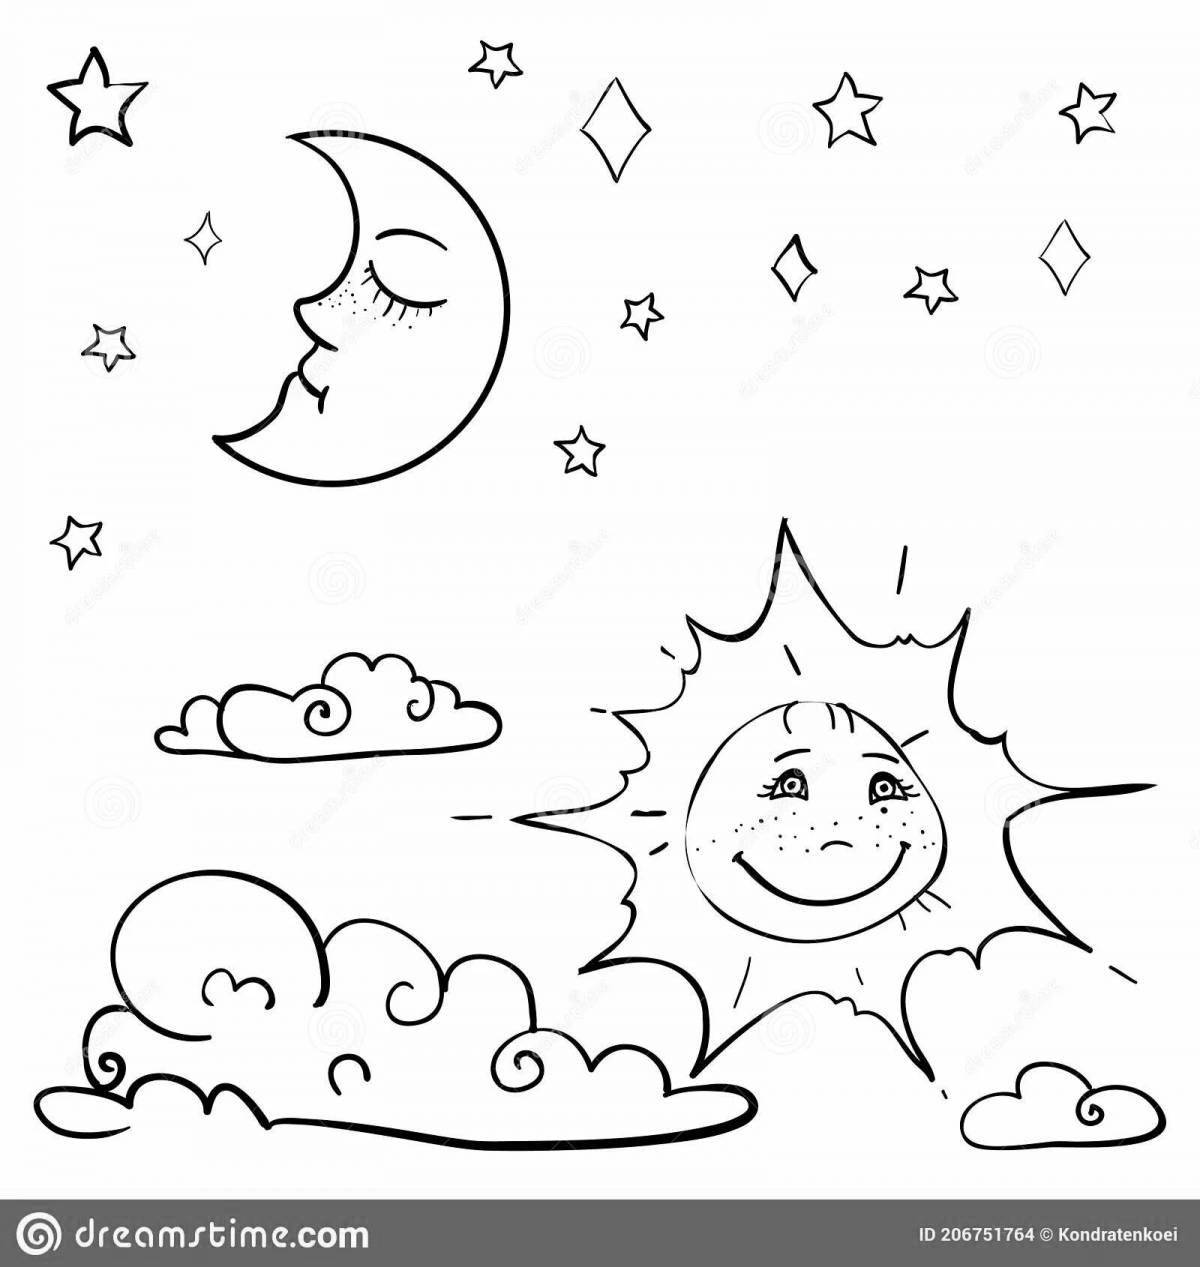 Moon and sun for kids #11